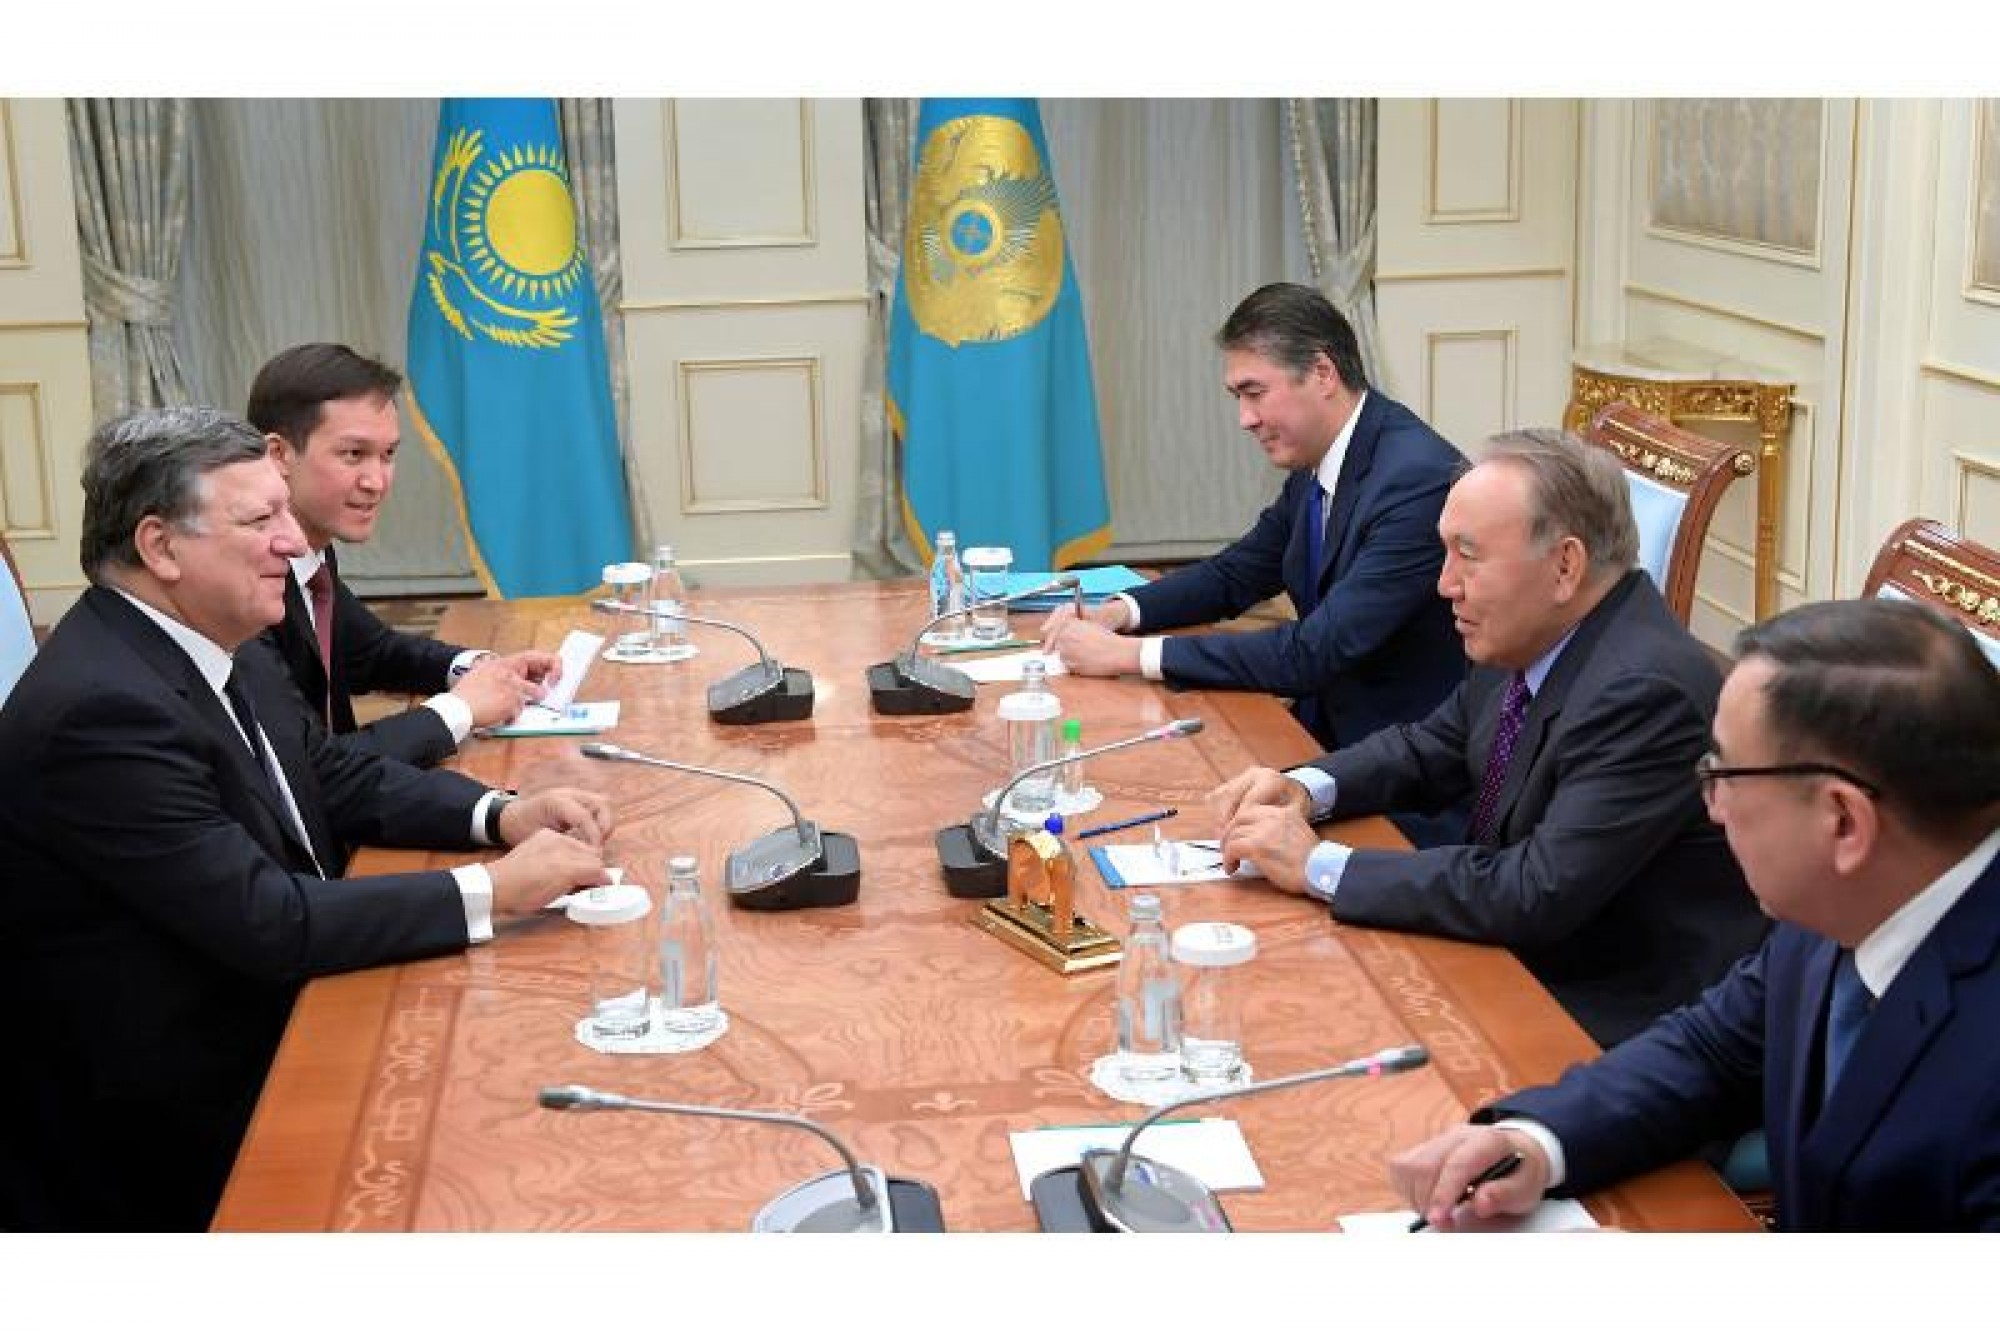 Head of State met with former European Commission President Jose Manuel Barroso